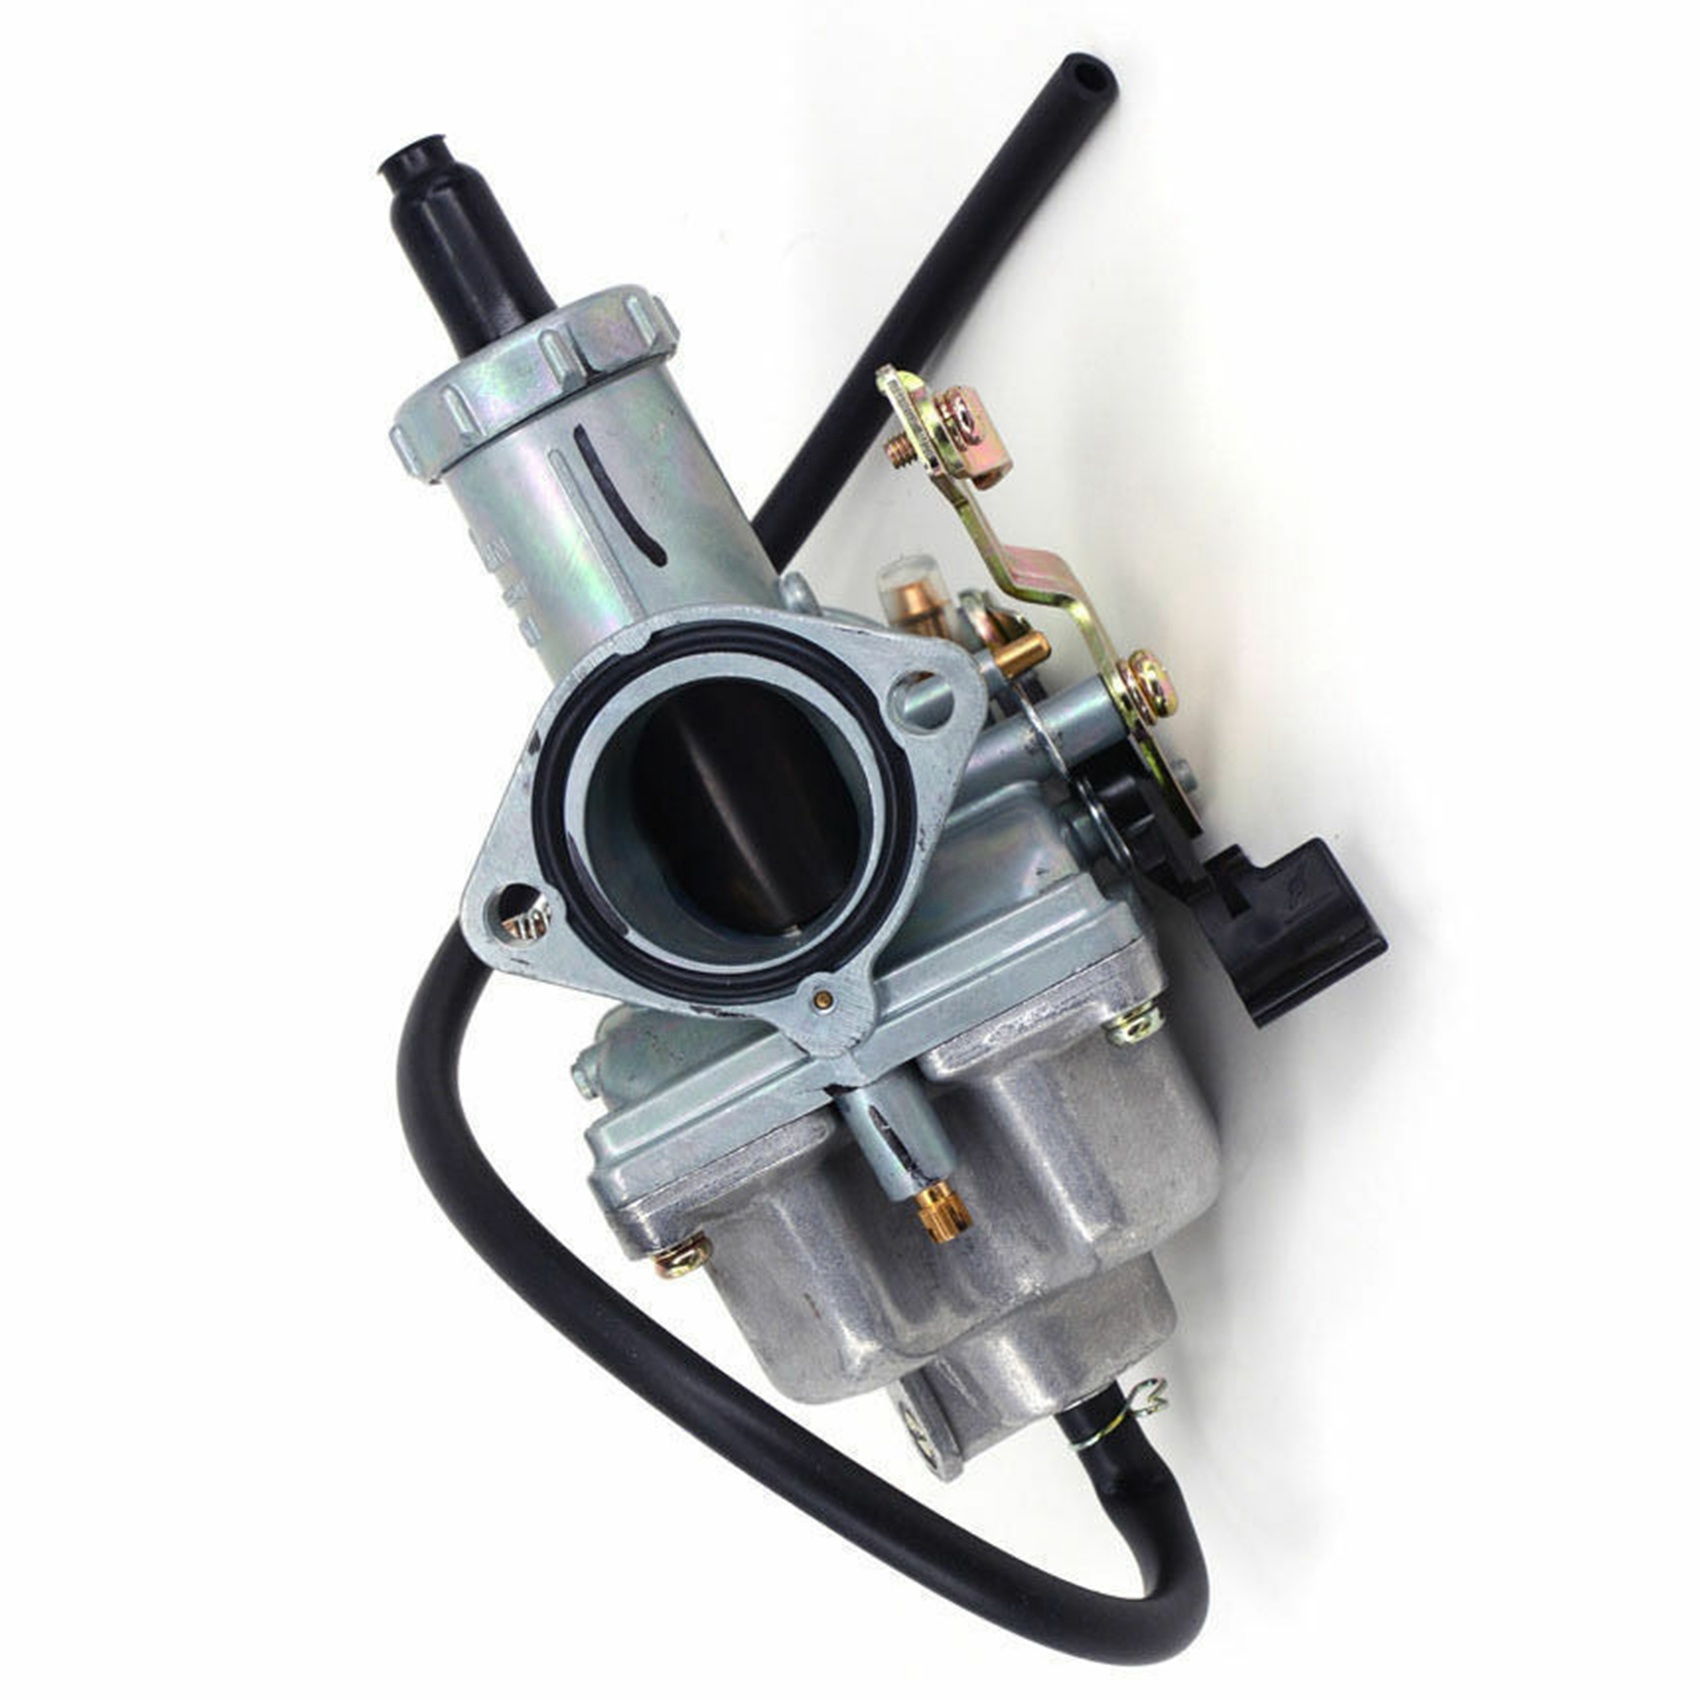 PZ30 Carburetor is Suitable for 200 250 300 Cc Off-Road Vehicles, with Manual Operation Chain ATV Scooter Light Engine